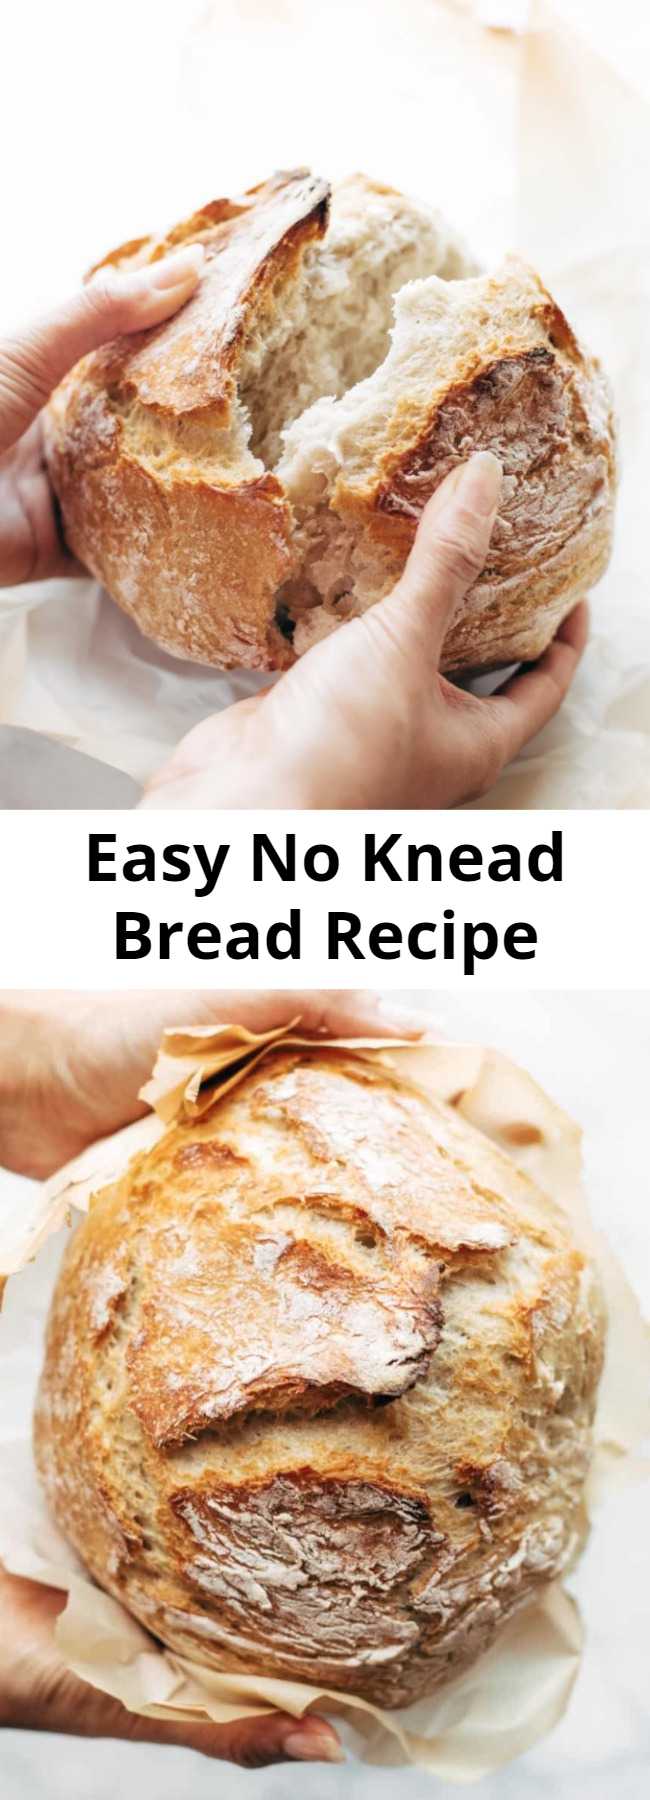 Easy No Knead Bread Recipe - Miracle No Knead Bread! this is SO UNBELIEVABLY GOOD and ridiculously easy to make. crusty outside, soft and chewy inside – perfect for dunking in soups! #bread #easy #recipe #noknead